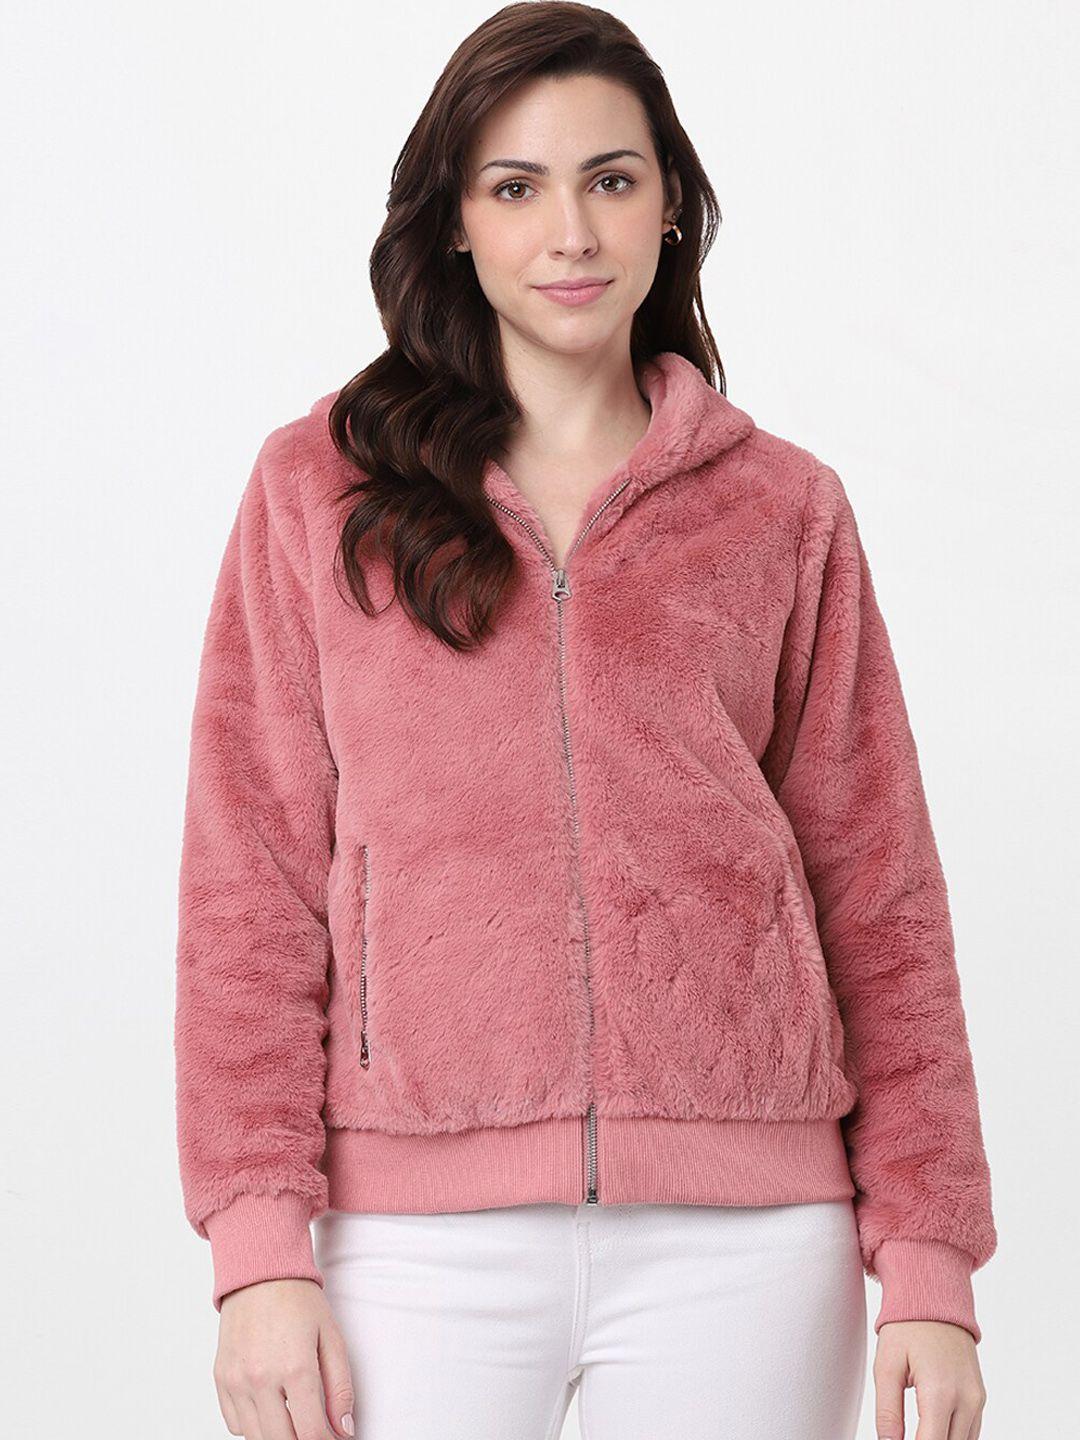 and-women-pink-bomber-jacket